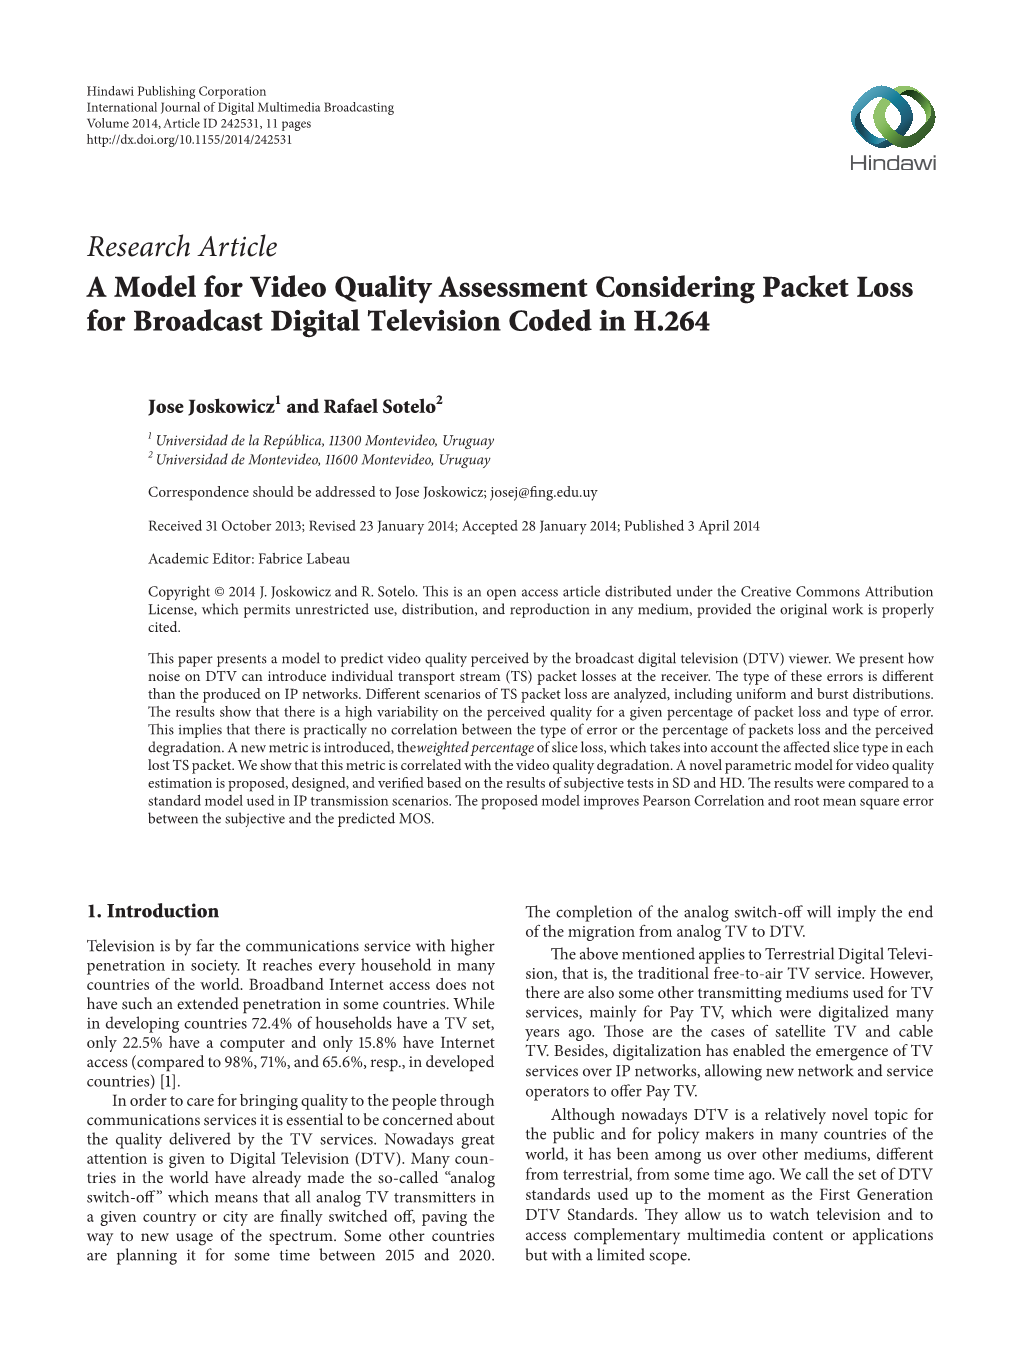 A Model for Video Quality Assessment Considering Packet Loss for Broadcast Digital Television Coded in H.264